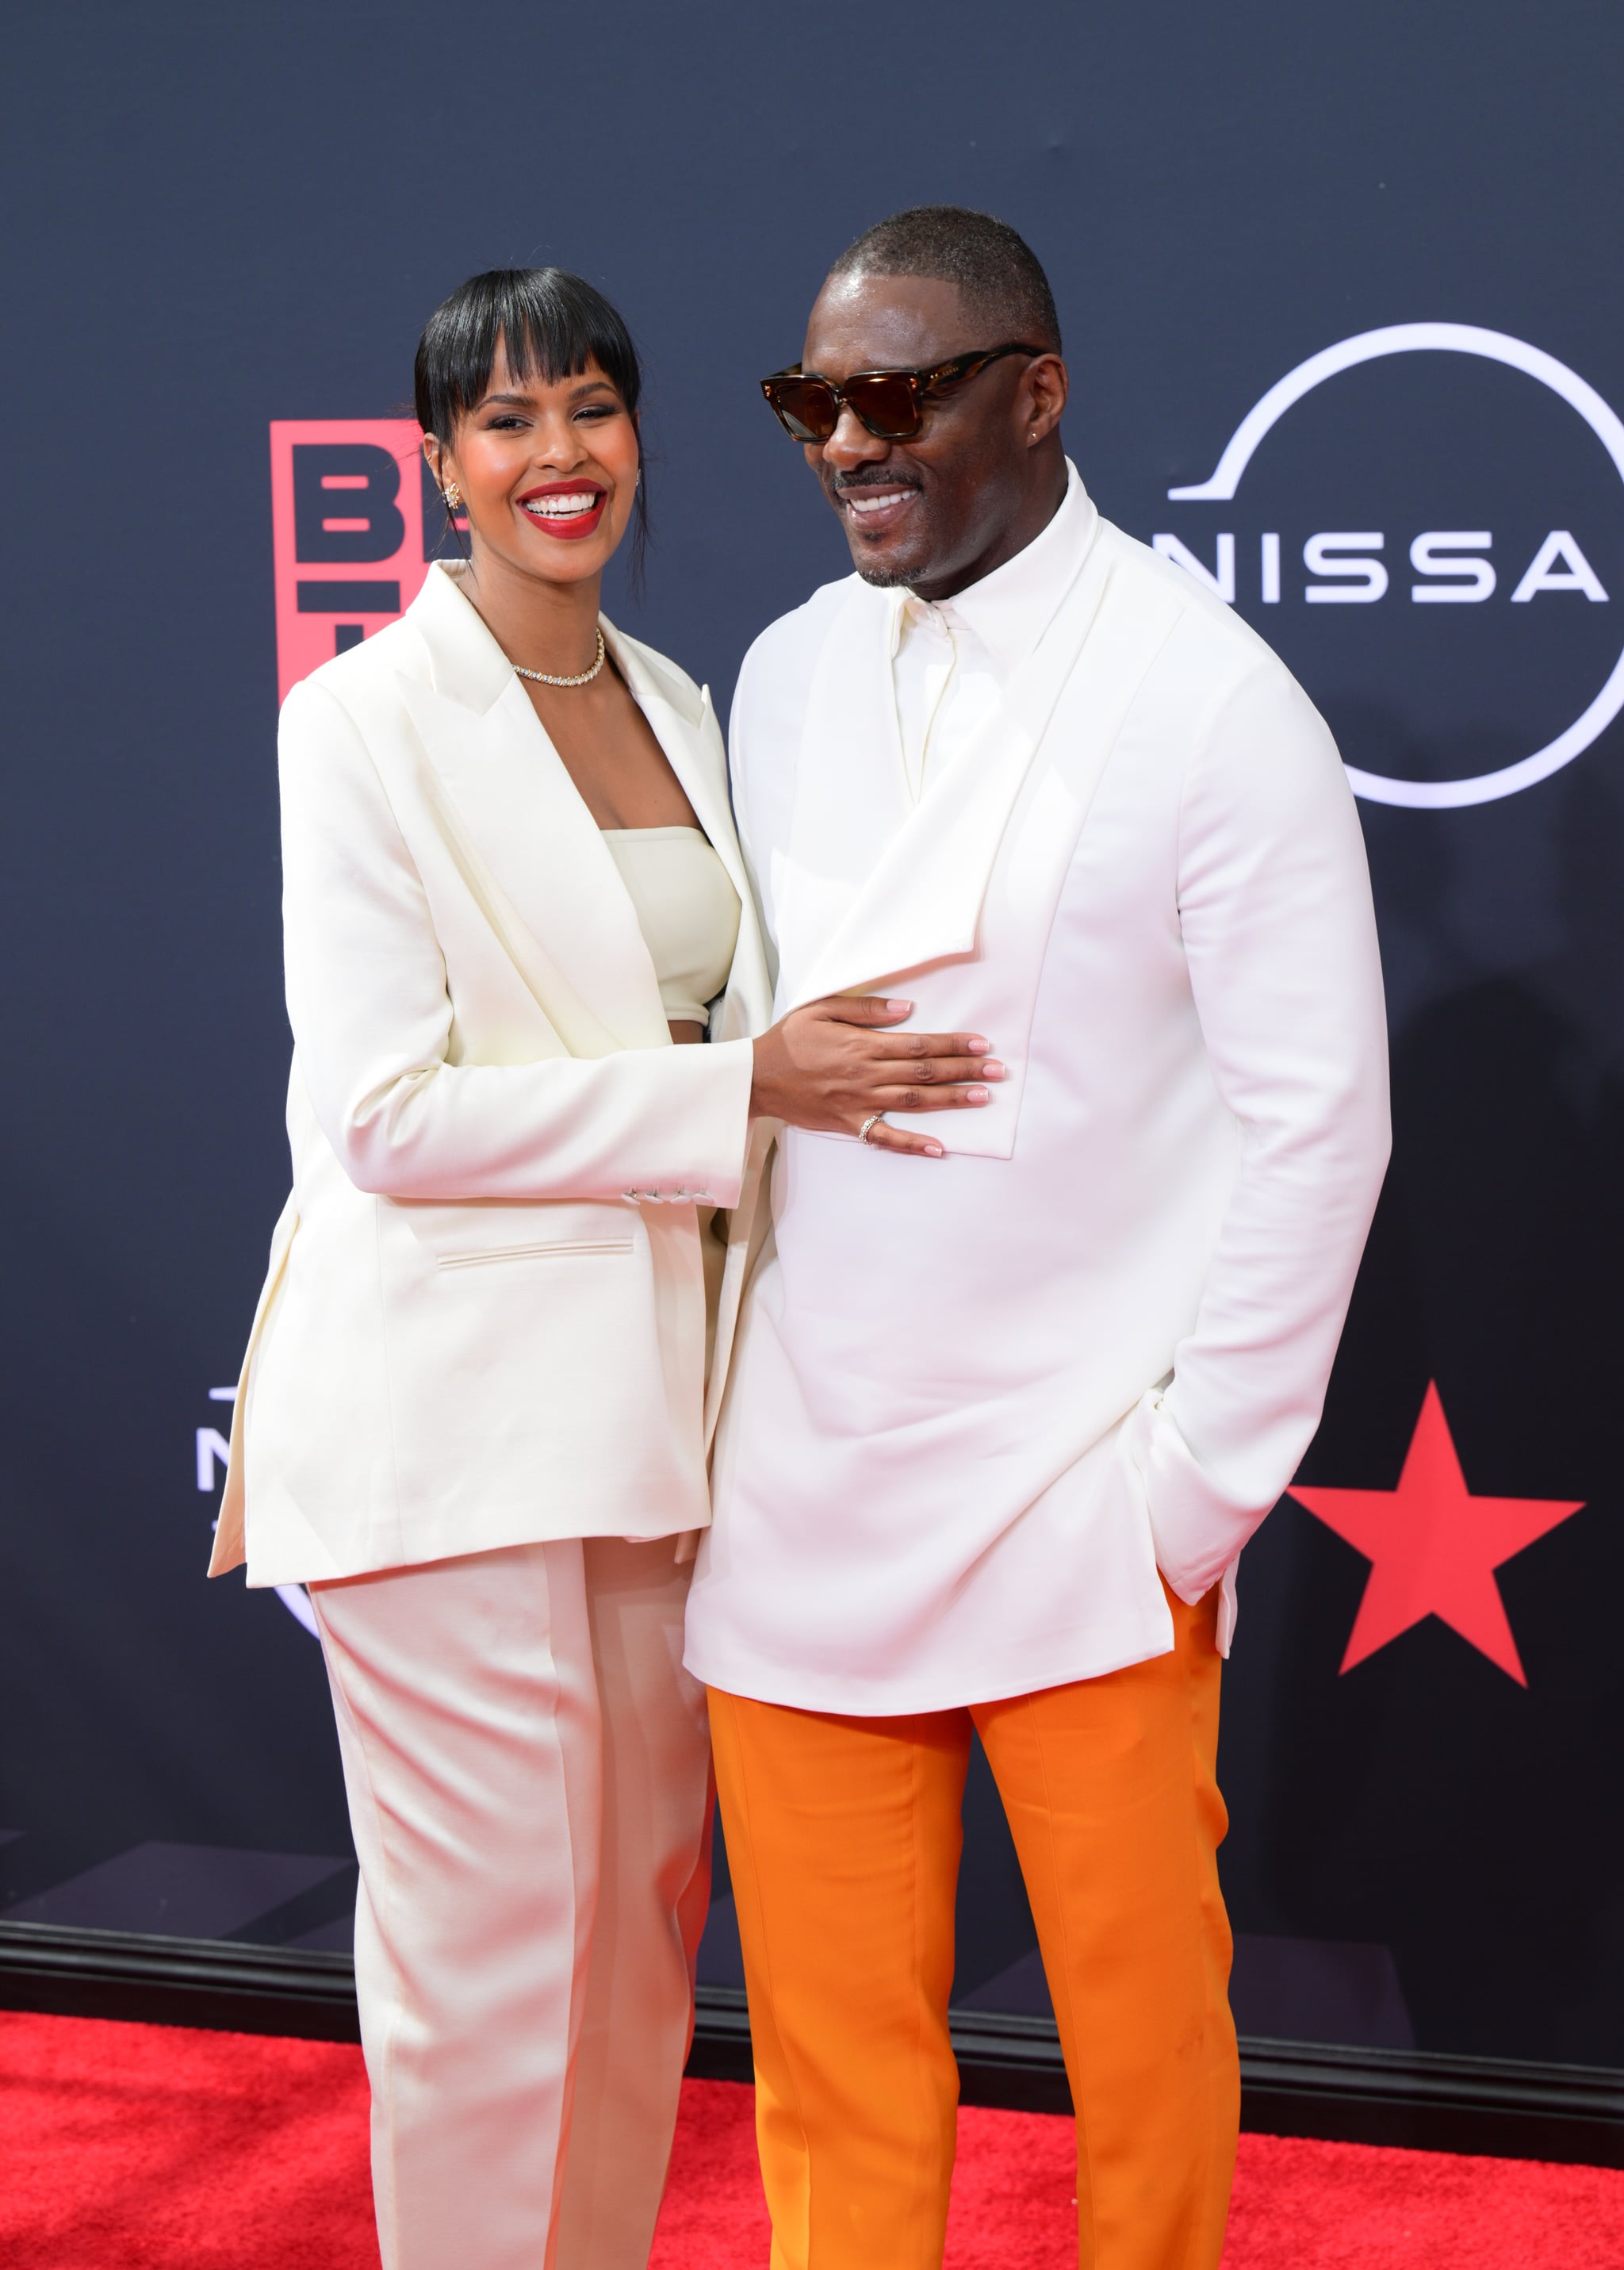 LOS ANGELES, CALIFORNIA - JUNE 26:( L-R) Sabrina Dhowre and Idris Elba attend the 2022 BET Awards at Microsoft Theater on June 26, 2022 in Los Angeles, California.(Photo by Prince Williams/ Getty Images)